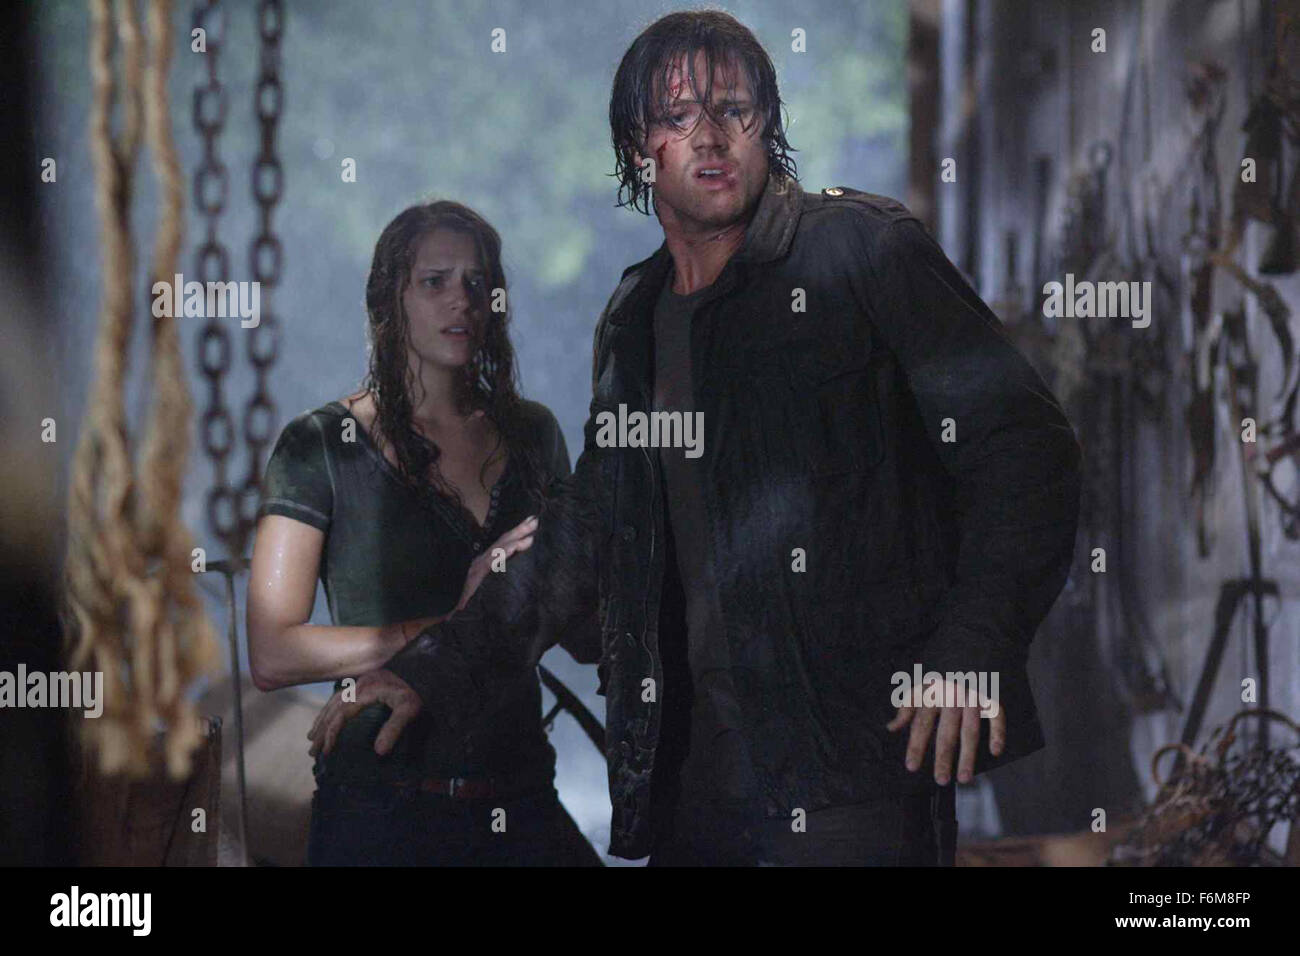 RELEASE DATE: February 13, 2009 . MOVIE TITLE: Friday the 13t. STUDIO: Paramount Pictures. PLOT: A group of young adults discover a boarded up Camp Crystal Lake, where they soon encounter Jason Voorhees and his deadly intentions. PICTURED: AMANDA RIGHETTI stars as Whitney and JARED PADALECKI stars as Clay. Stock Photo